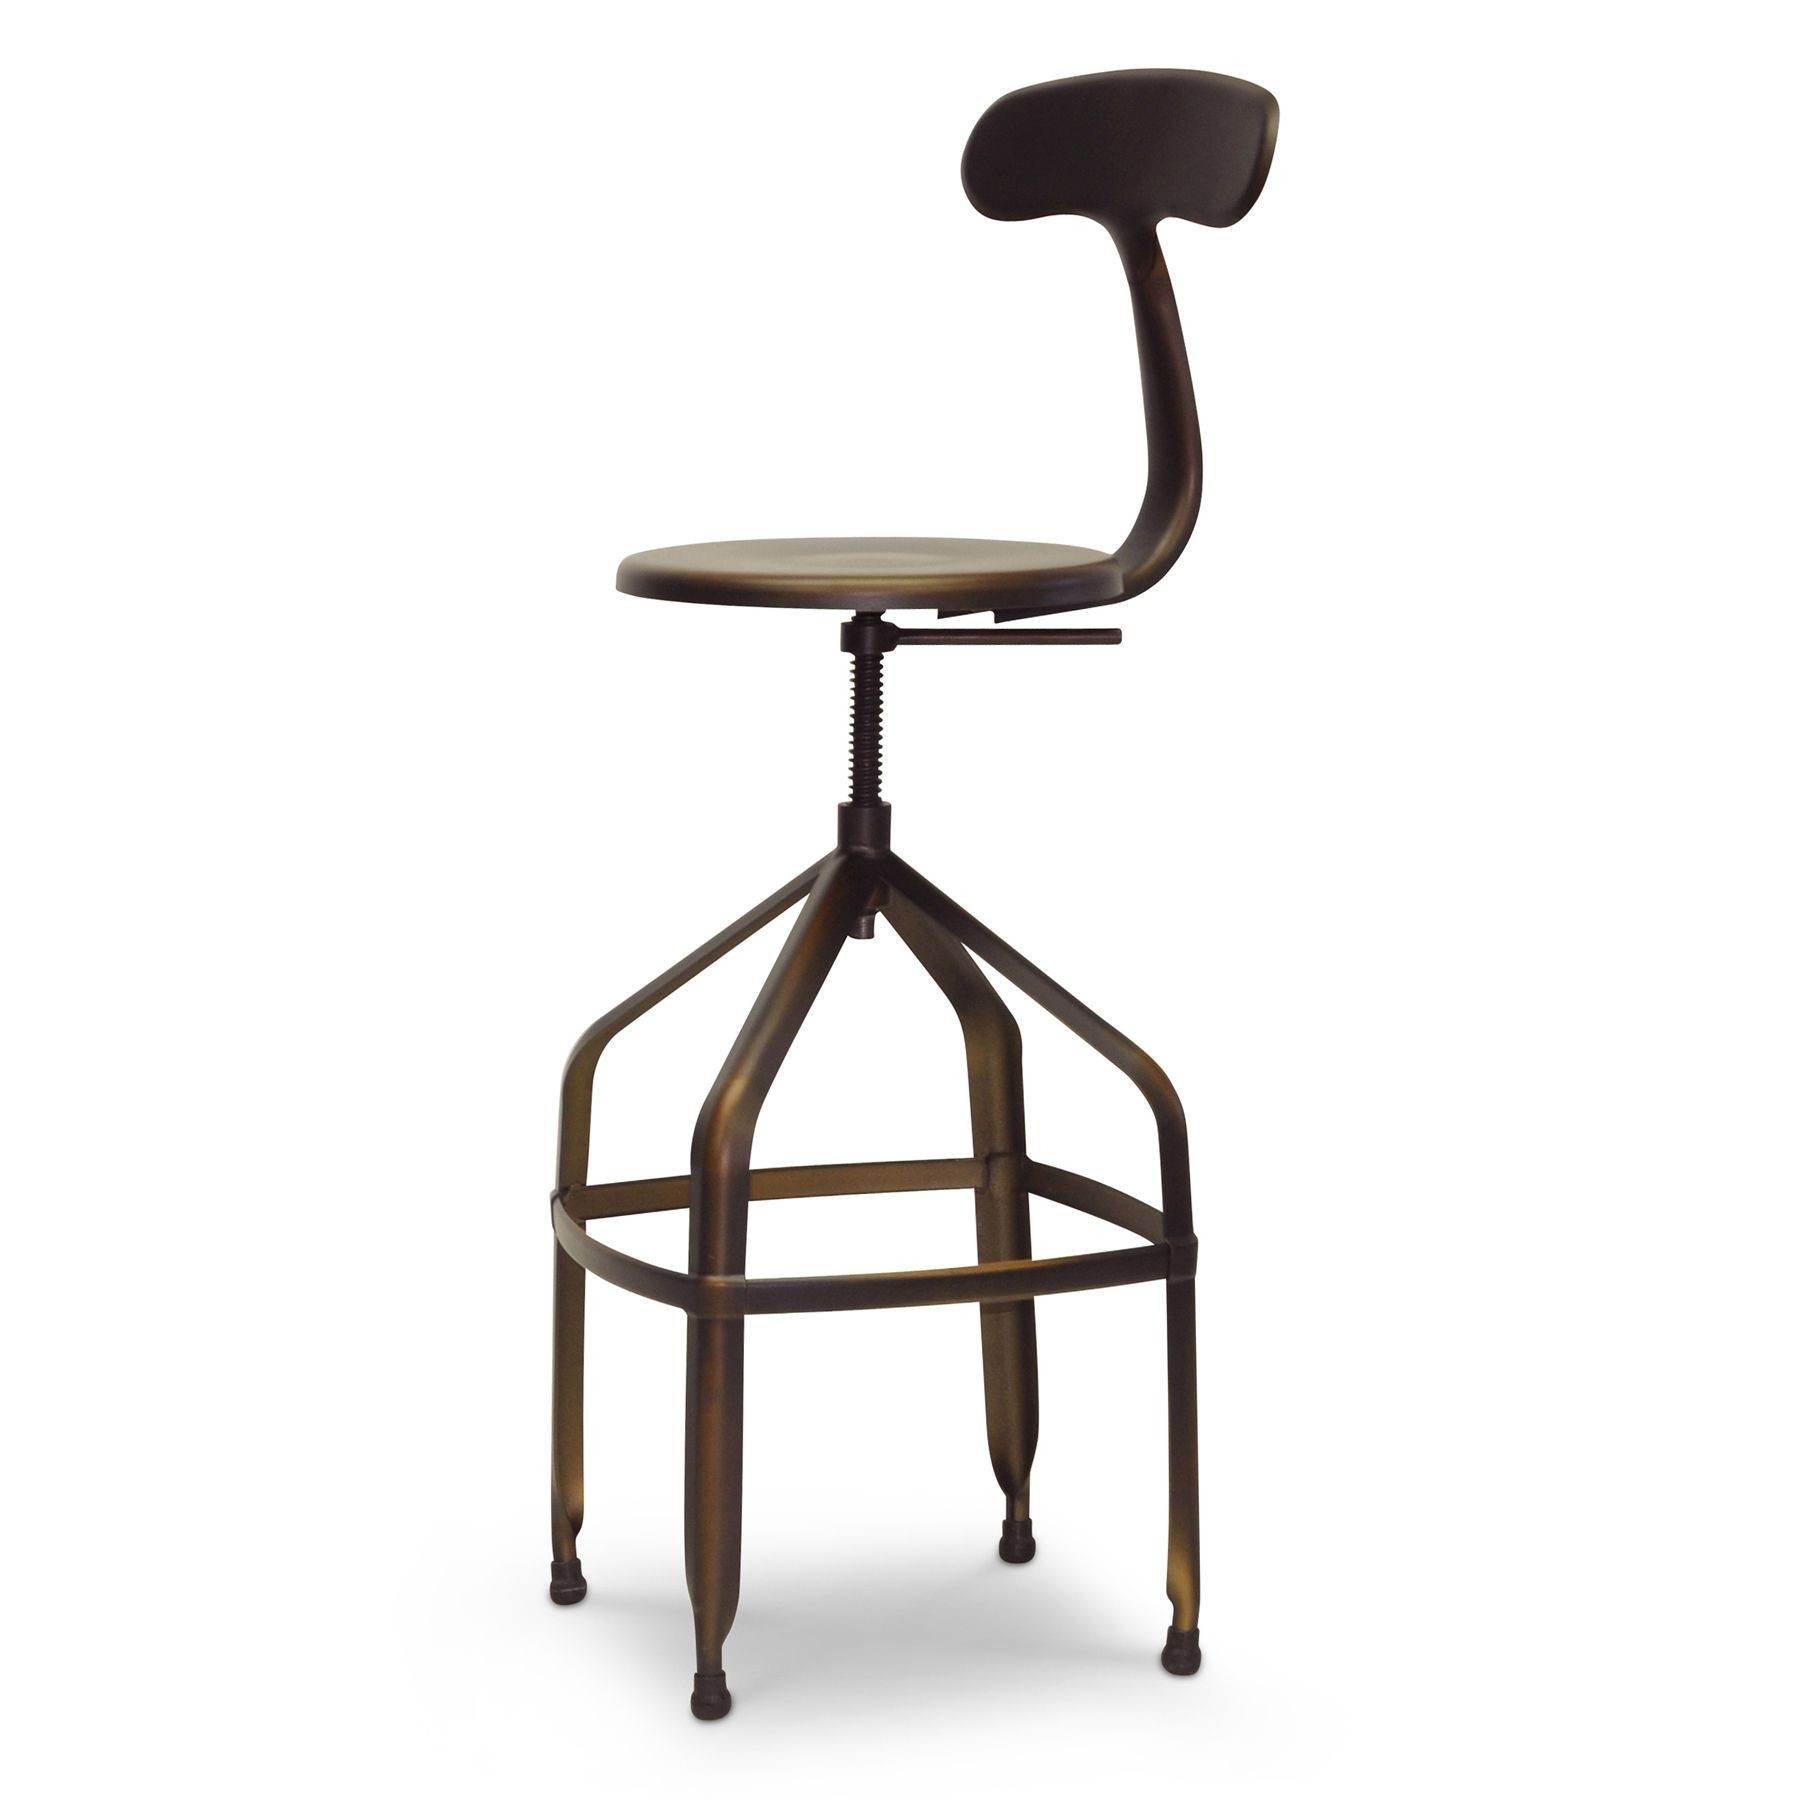 Baxton Studio Architect's Industrial Bar Stool with Backrest, Antiqued Copper